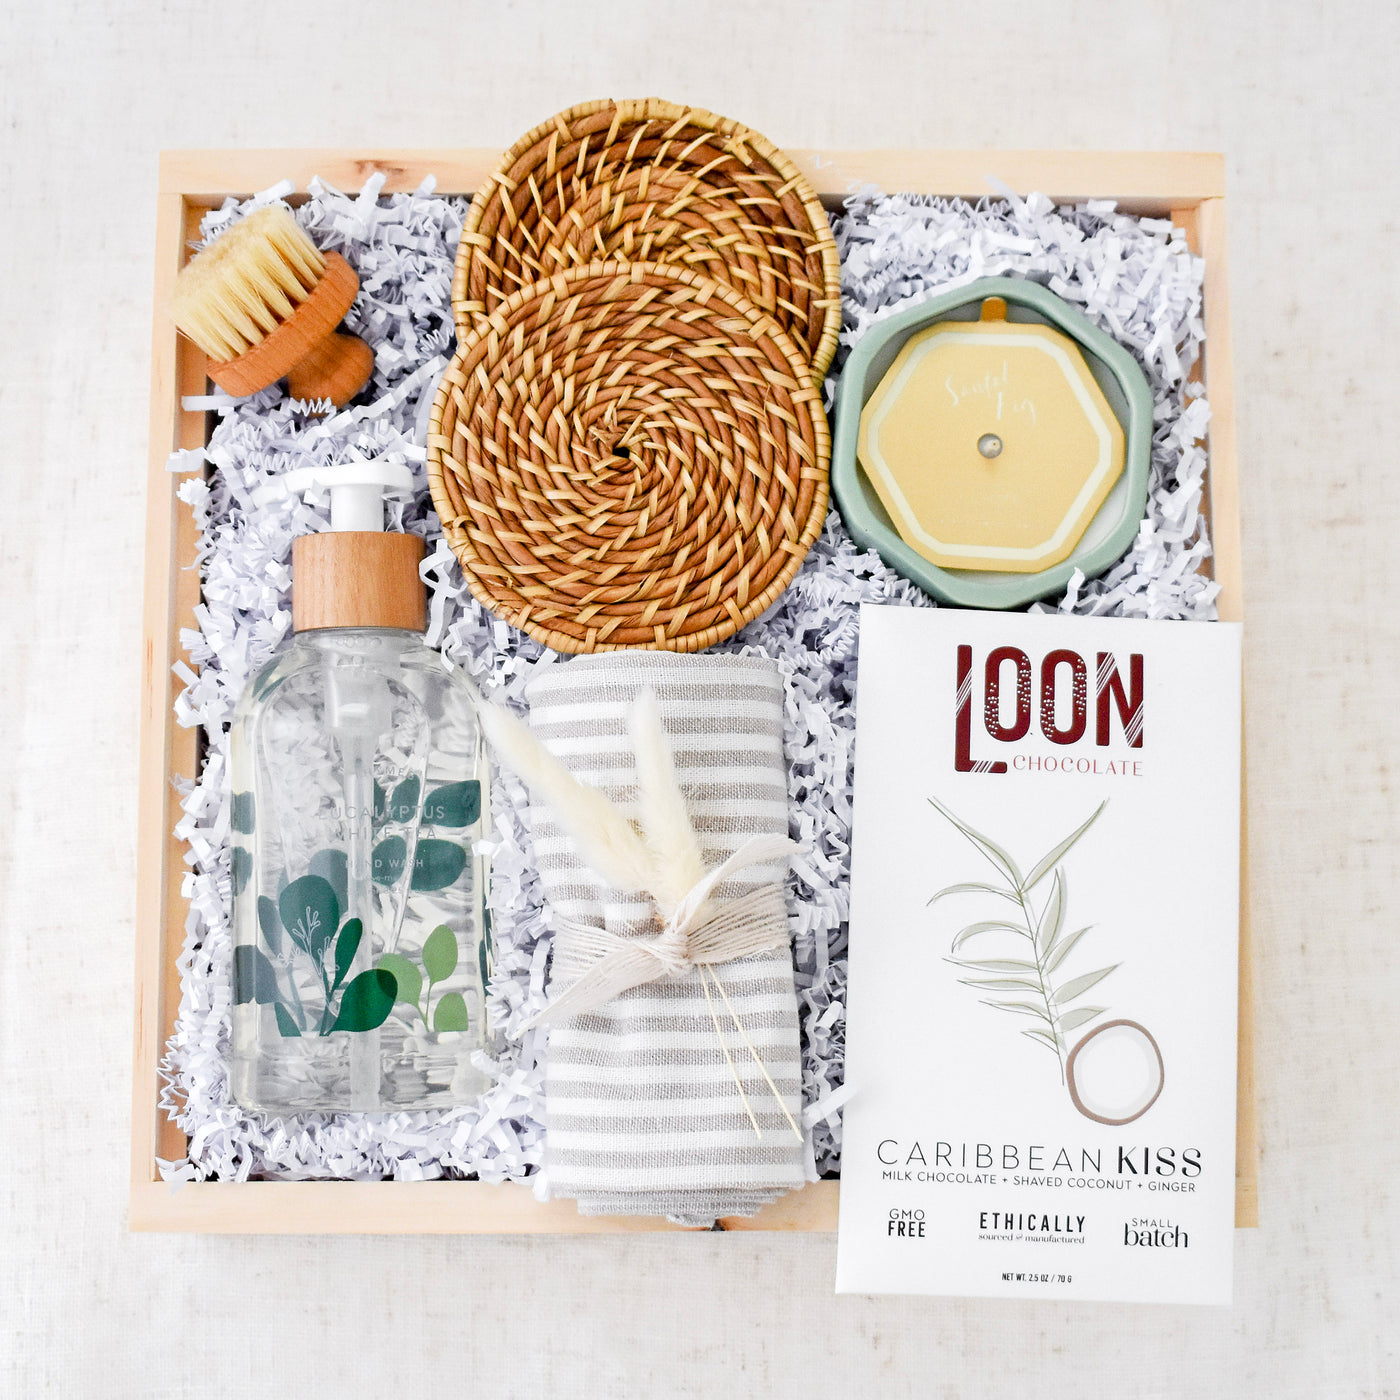 Help new home dwellers settle in with this beautifully refreshing gift box. Includes: Santal Fig Candle, Eucalyptus White Tea Hand Wash, Striped Linen Tea Towel, Caribbean Kiss Chocolate Bar, Rattan Coasters, Mini Scrub Brush 